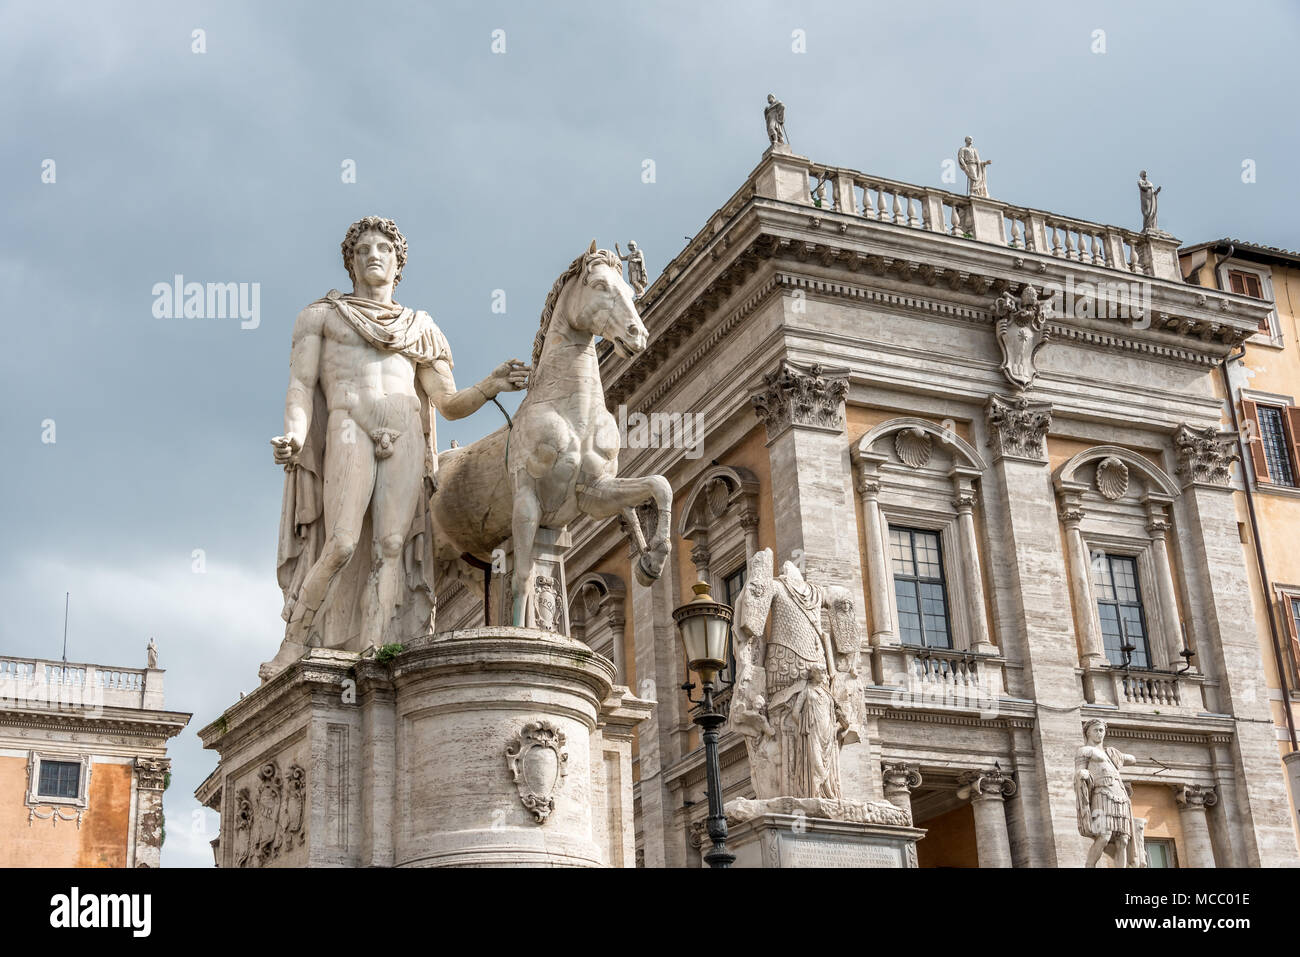 Sculpture of Pollux and horse at entrance to Piazza del Campidoglio on Capitoline Hill, Rome; looking up against cloudy sky with soft light, no people Stock Photo